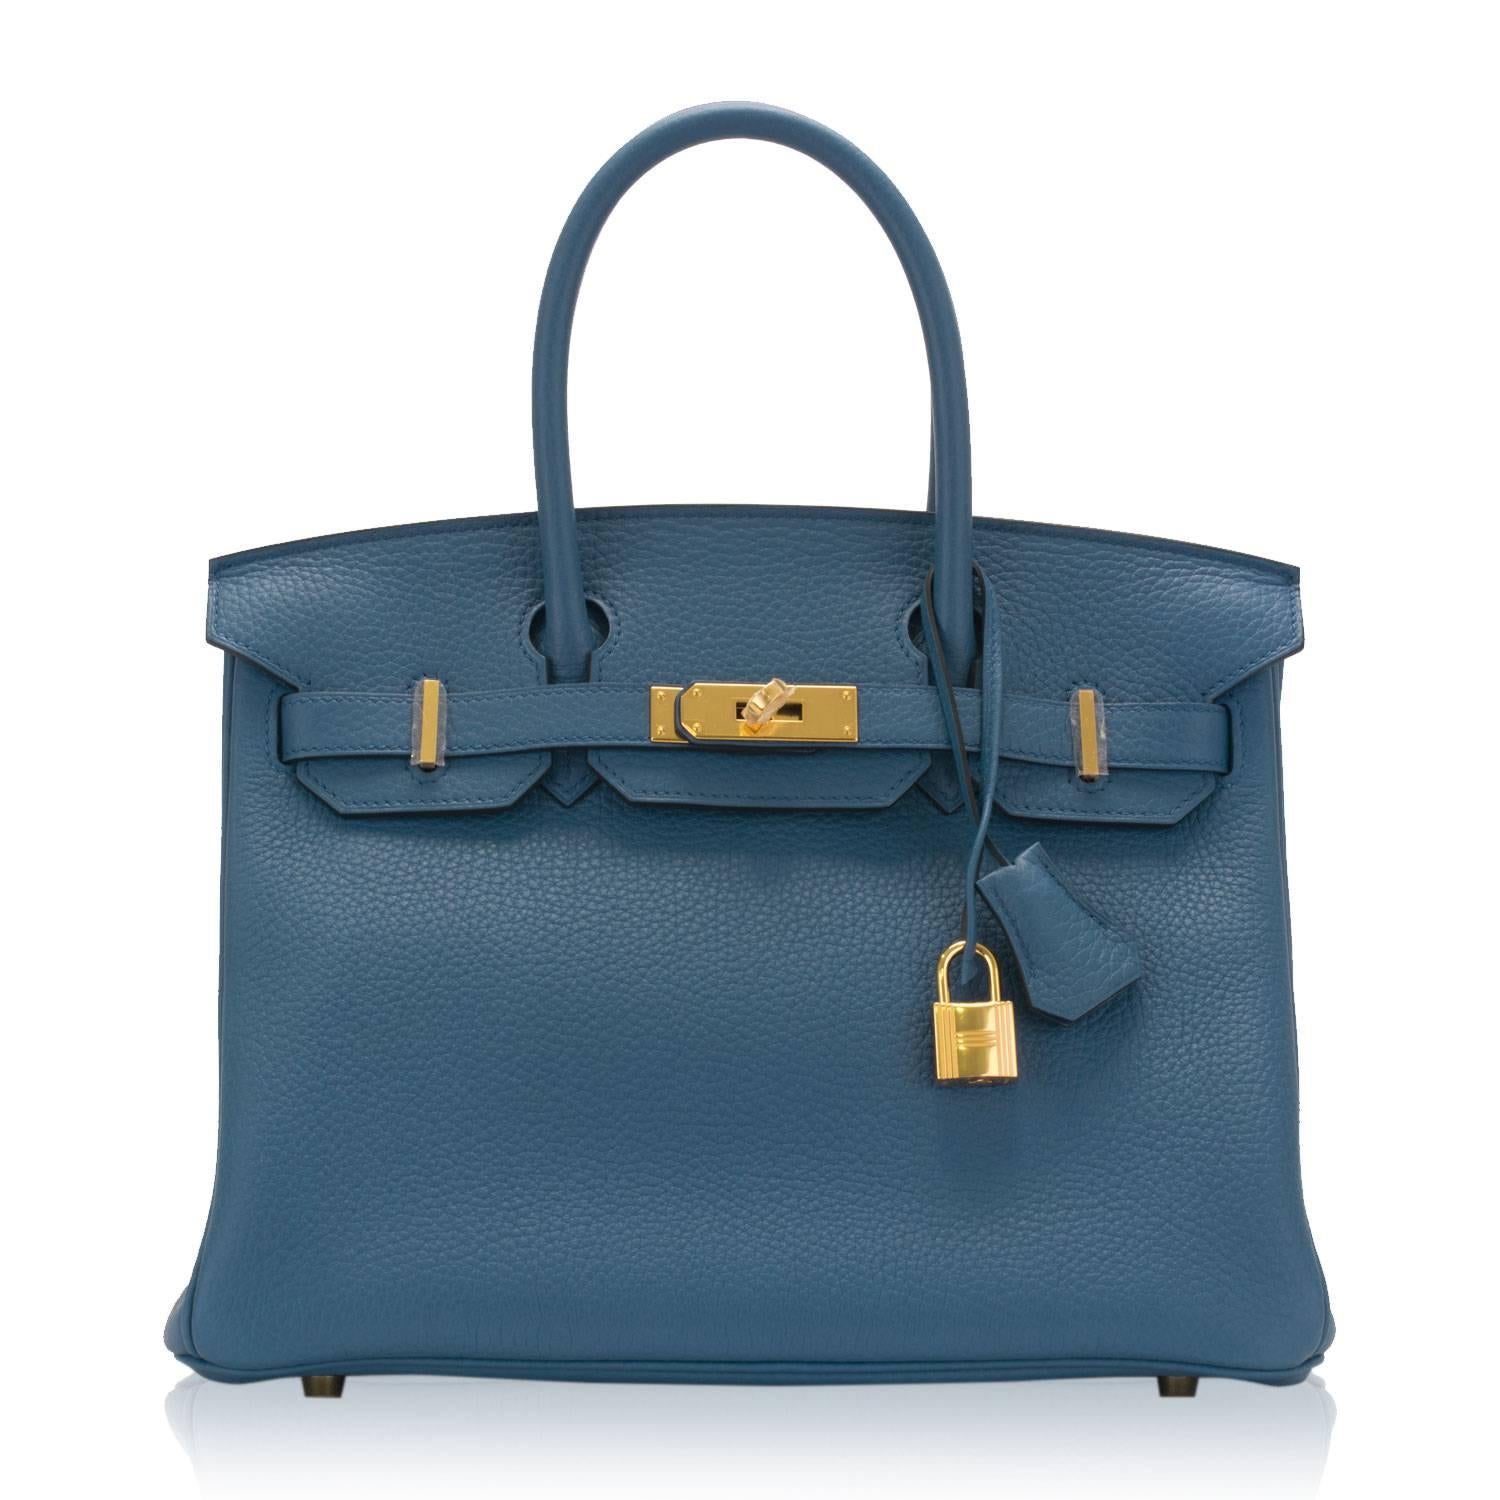 Hermes Birkin 30 T. Clemence Leather R2 Blue Agate NEW COLOR Gold Hardware 2016

Bought it in Hermes store in 2016.

Pre-owned and never used

Model:  Birkin

Dimension:  30cm width x 22cm height x 16cm length.

Color: R2 Blue Agate, NEW